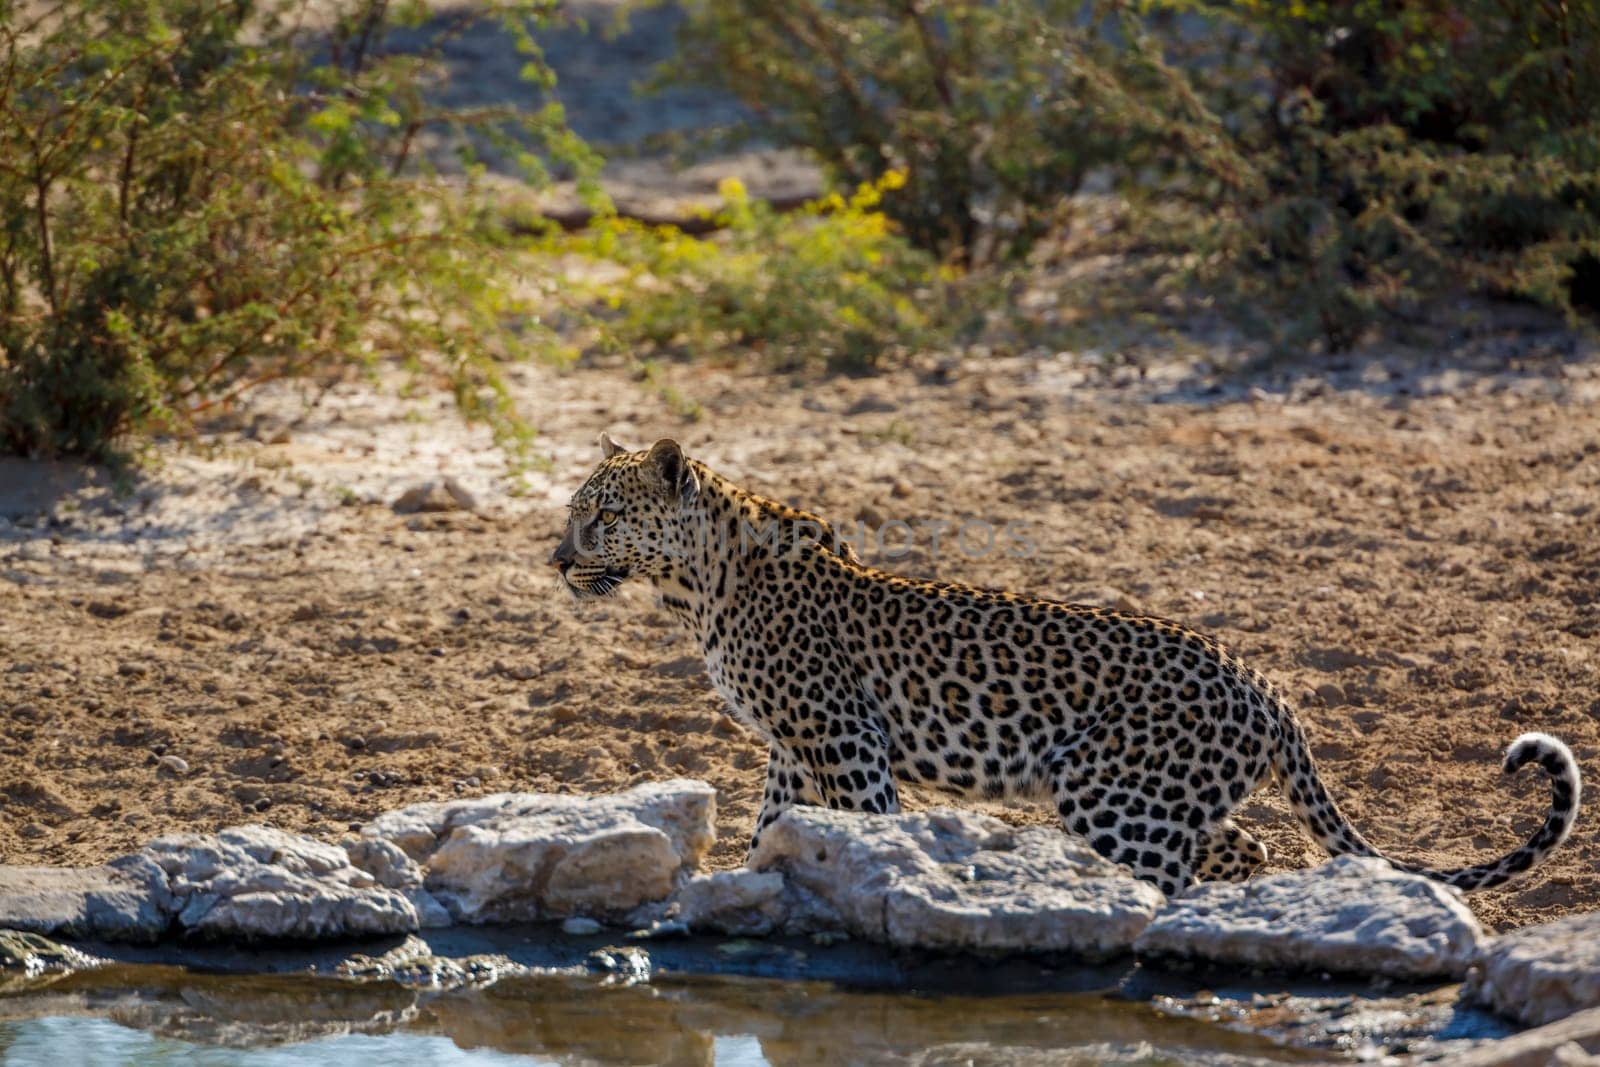 Leopard in Kgalagadi transfrontier park, South Africa by PACOCOMO